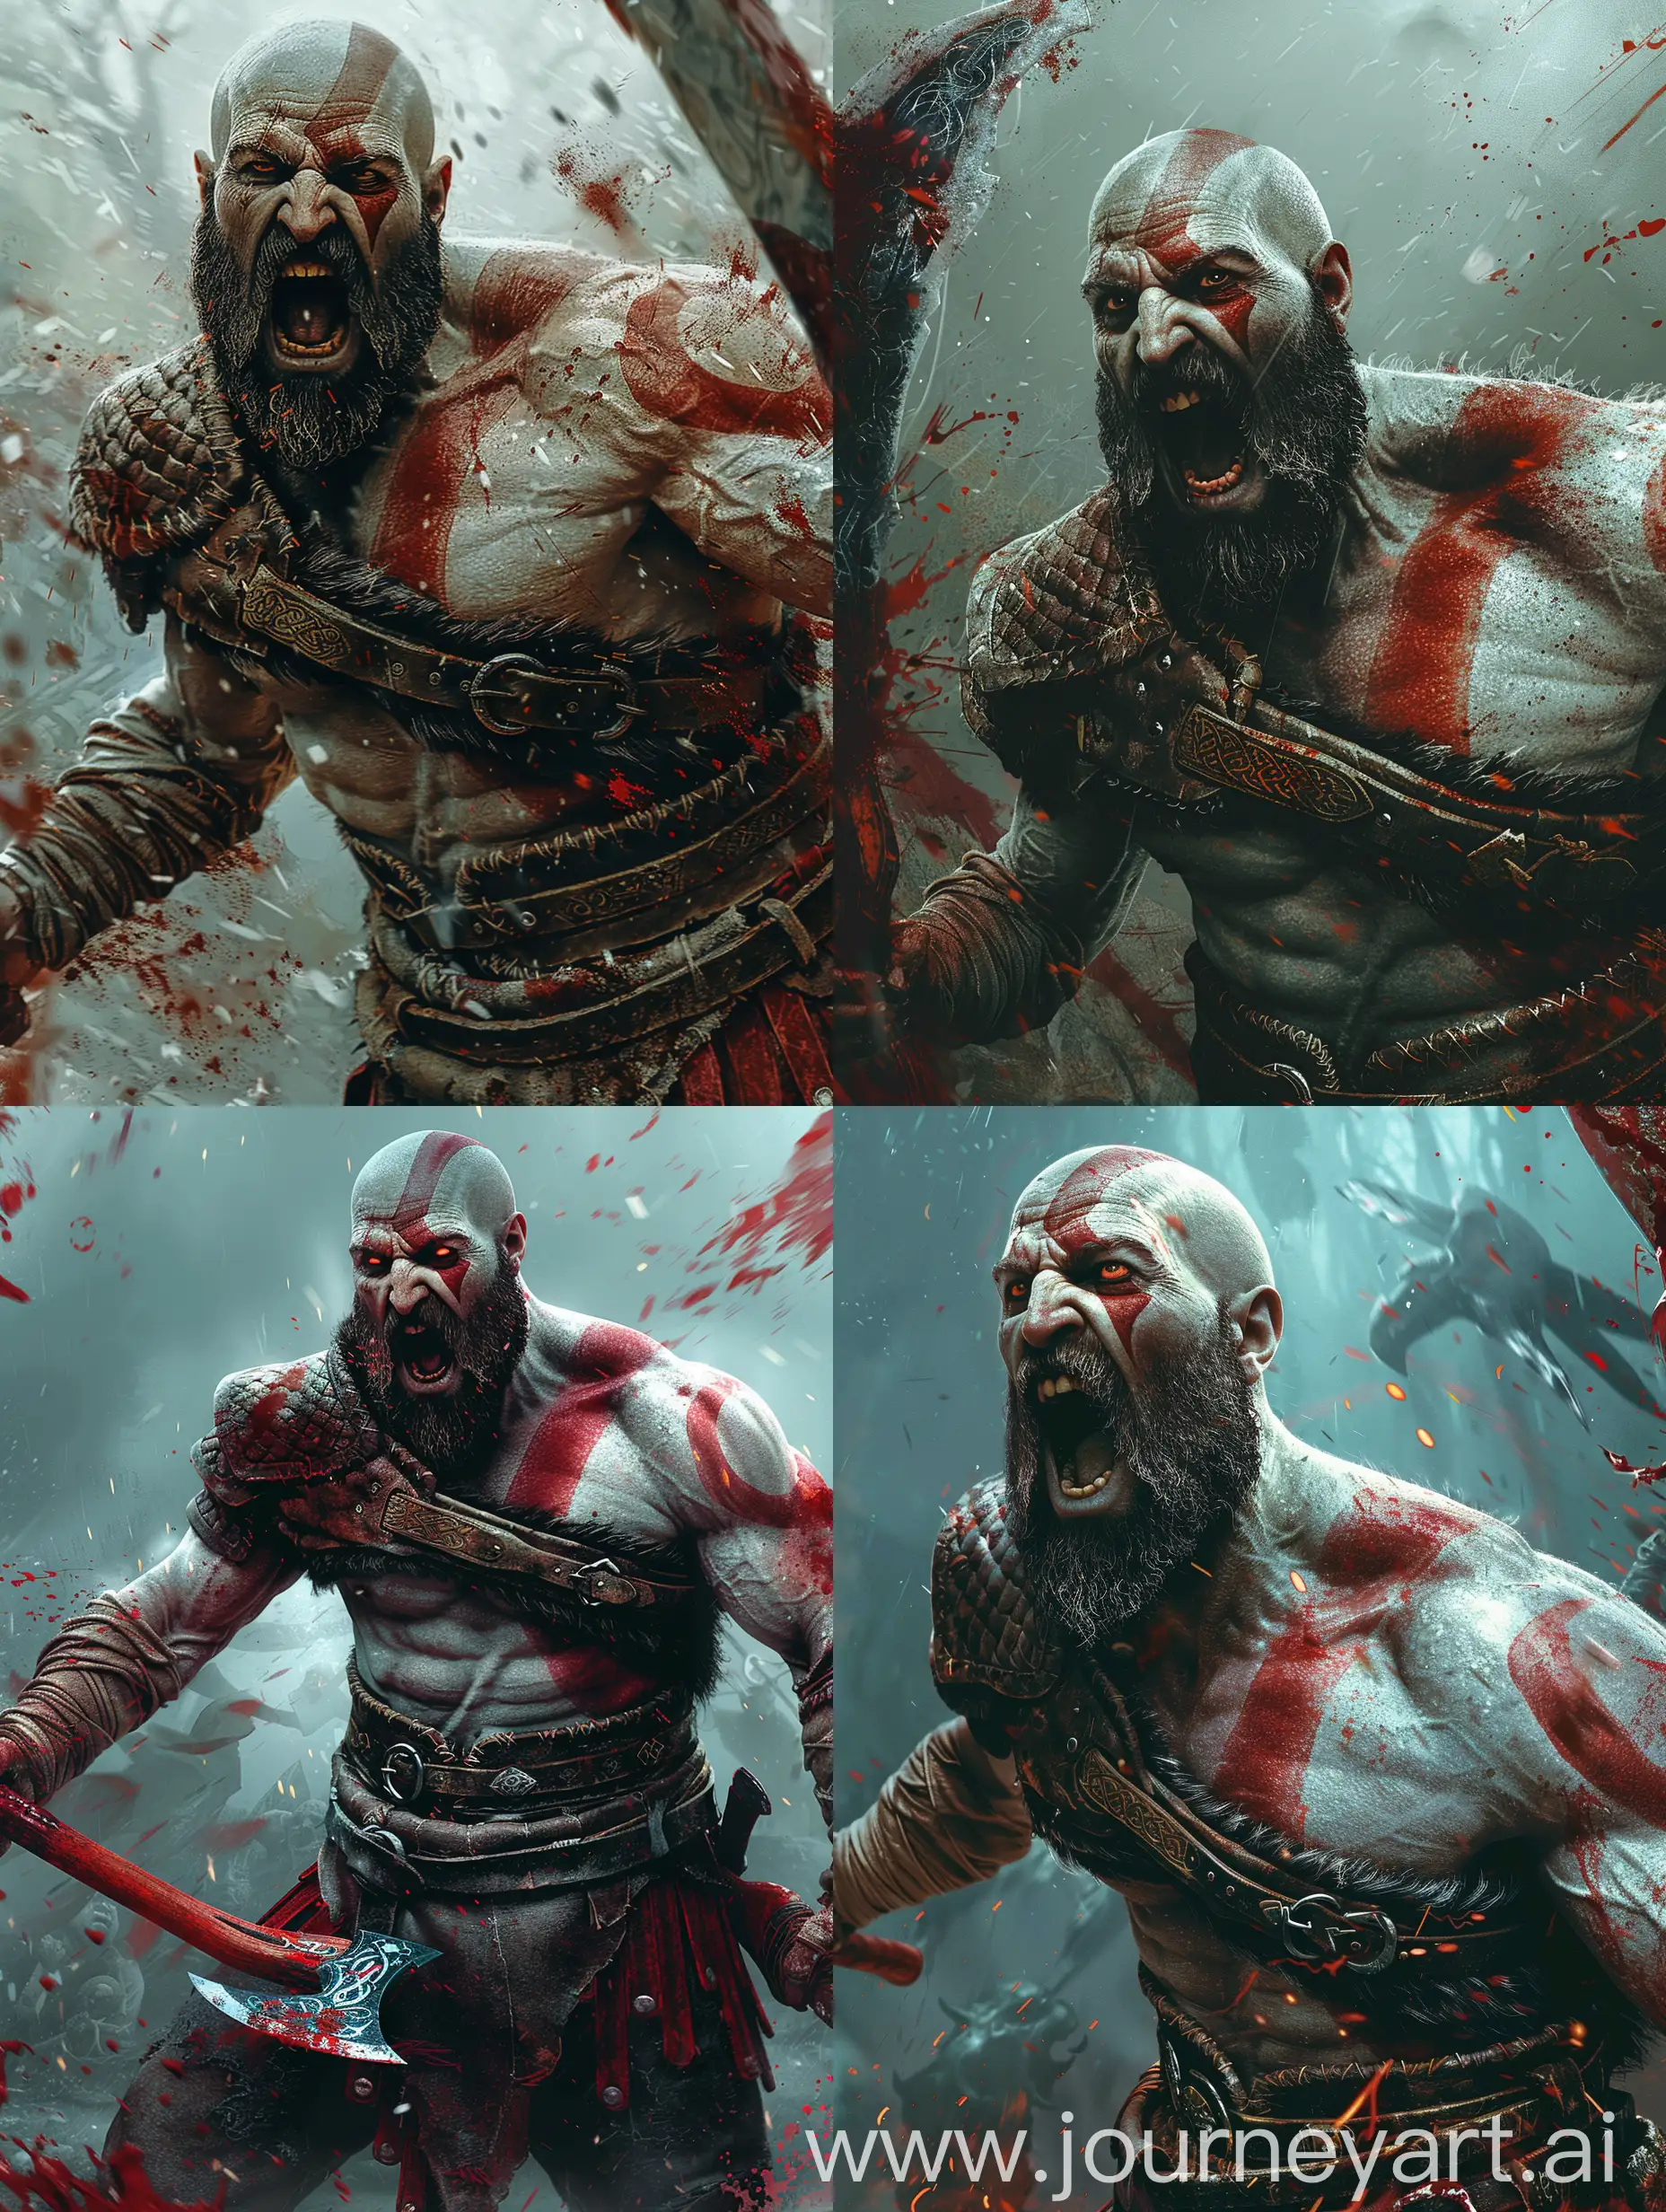 Furious-Kratos-Battling-Monstrous-Foes-with-Bloody-Power